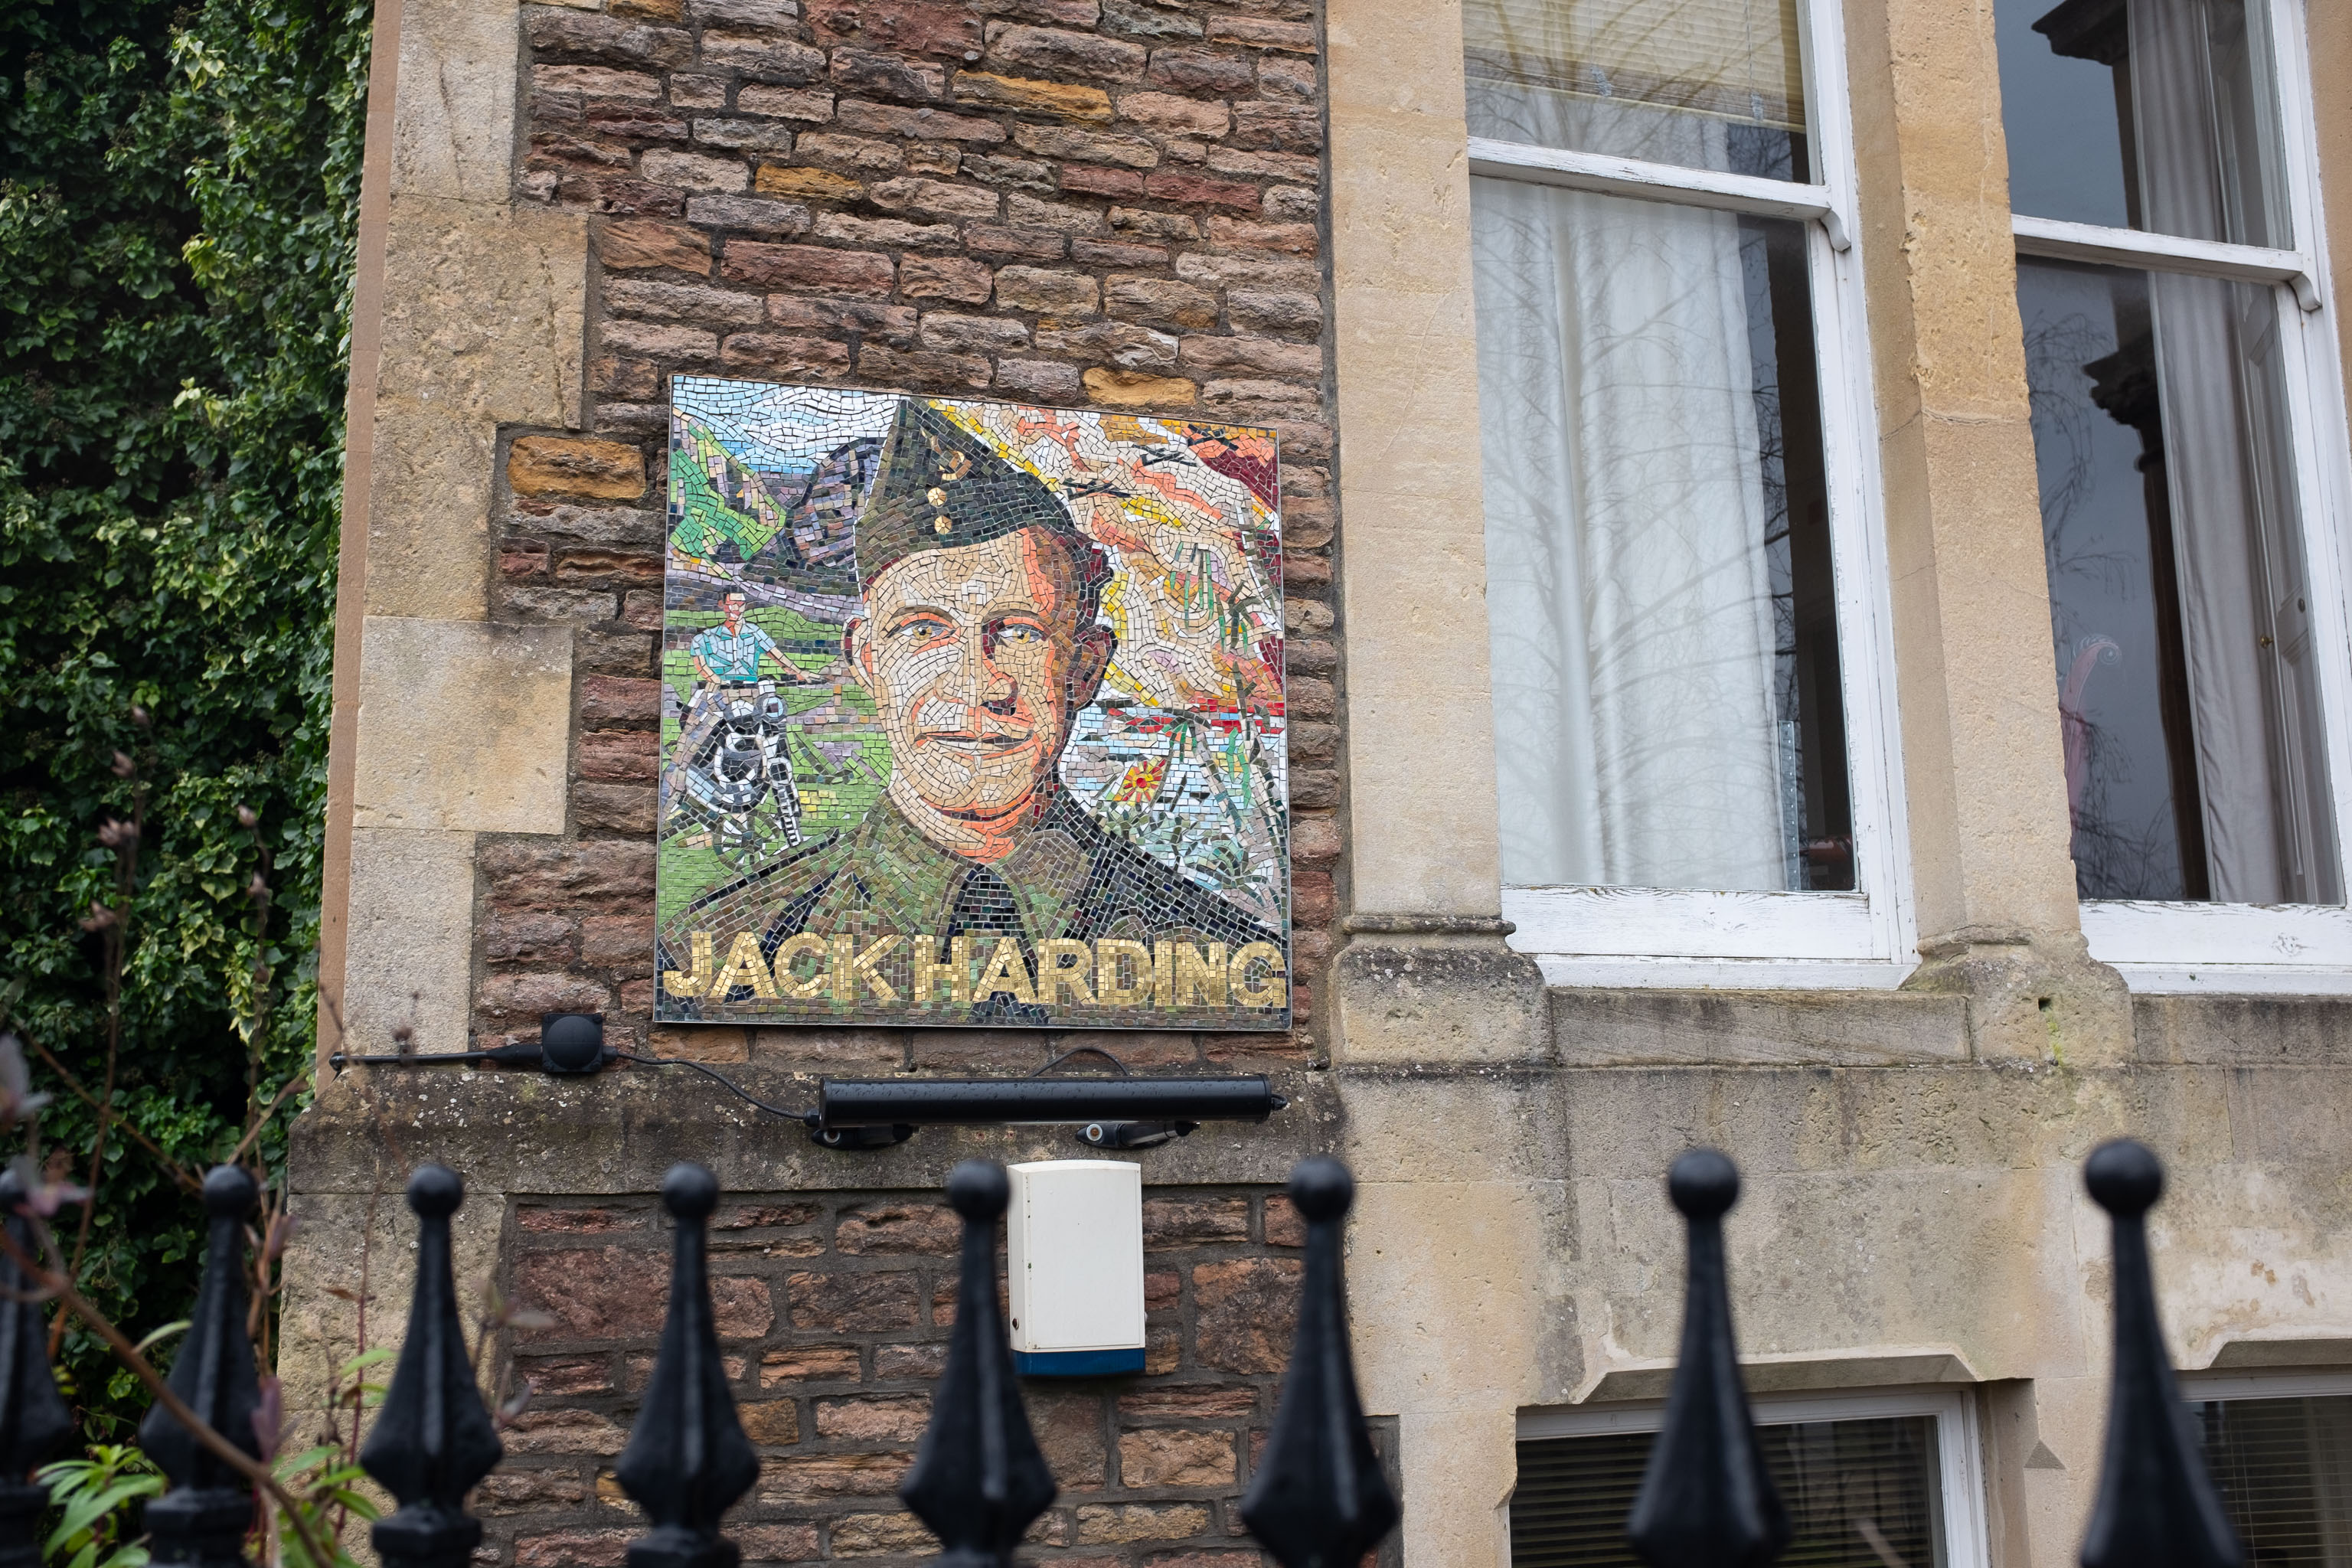 Jack Harding
I think I've looked this up before, but there's no harm in repeating myself, I suppose:


  Jack Harding was the property owner’s father-in-law. He...